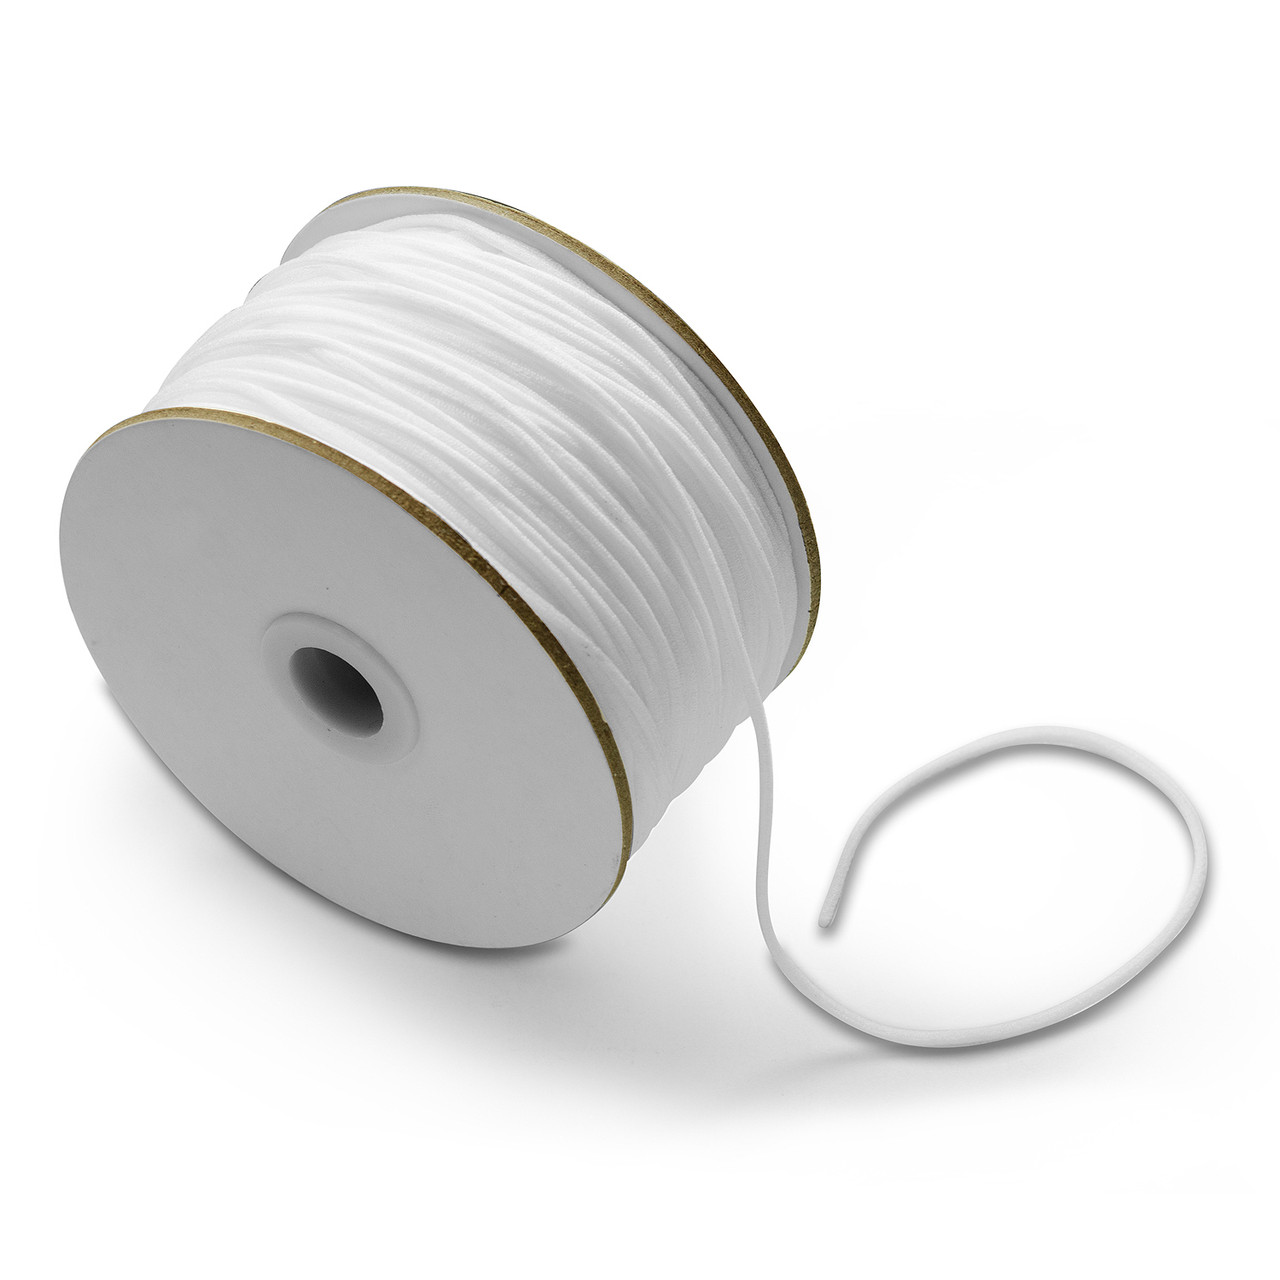 3/8 Inch White Elastic Cord for Sewing, 1 Yard, 8mm Wide, Stretchy El